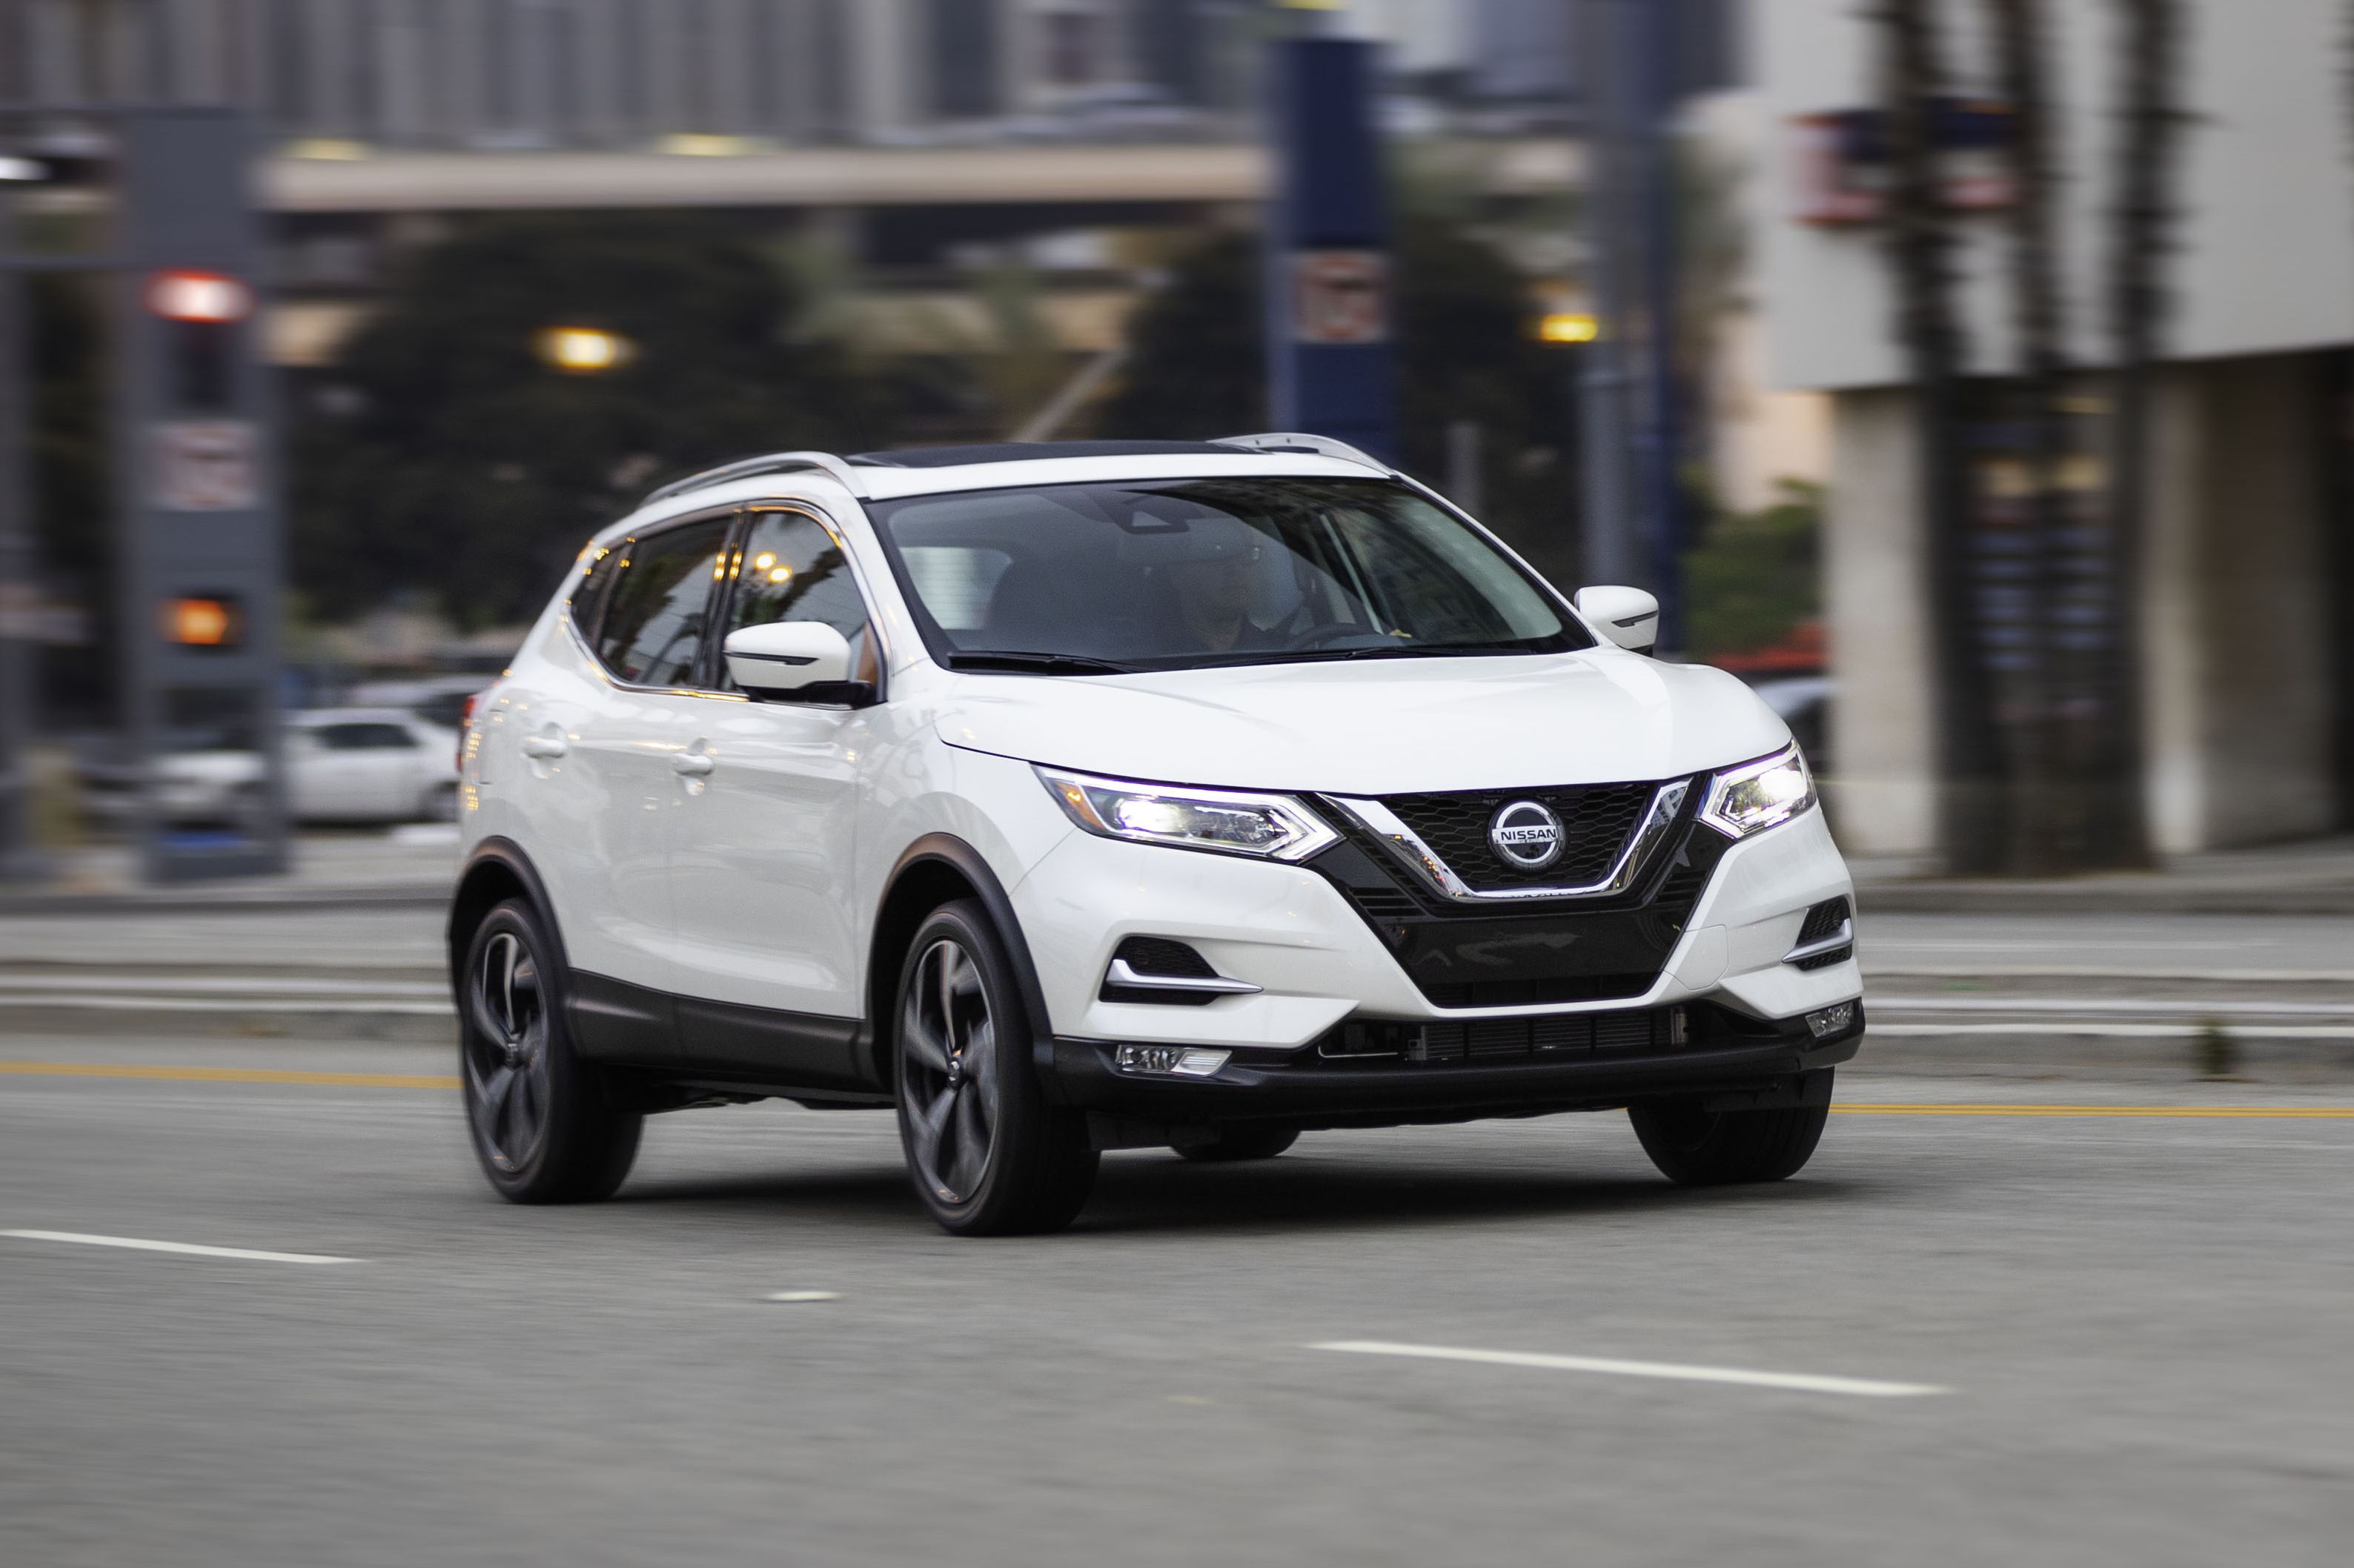 AD] Nissan Qashqai review: is it the right family car for you?